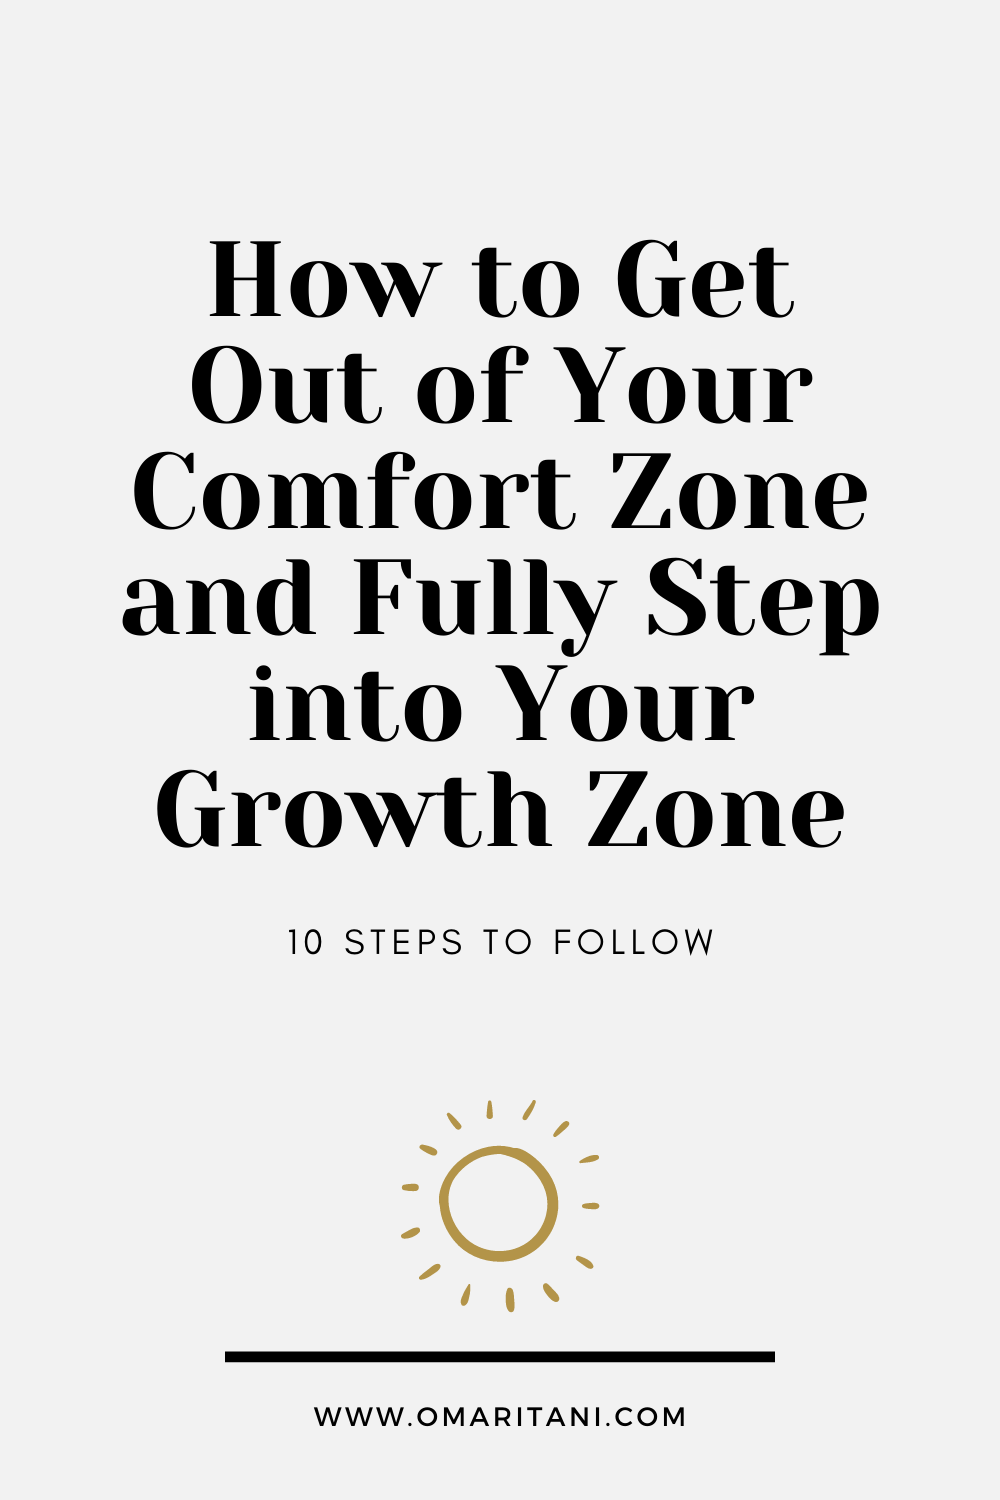 Quick Guide on how to leave the comfort zone at work - PHRS